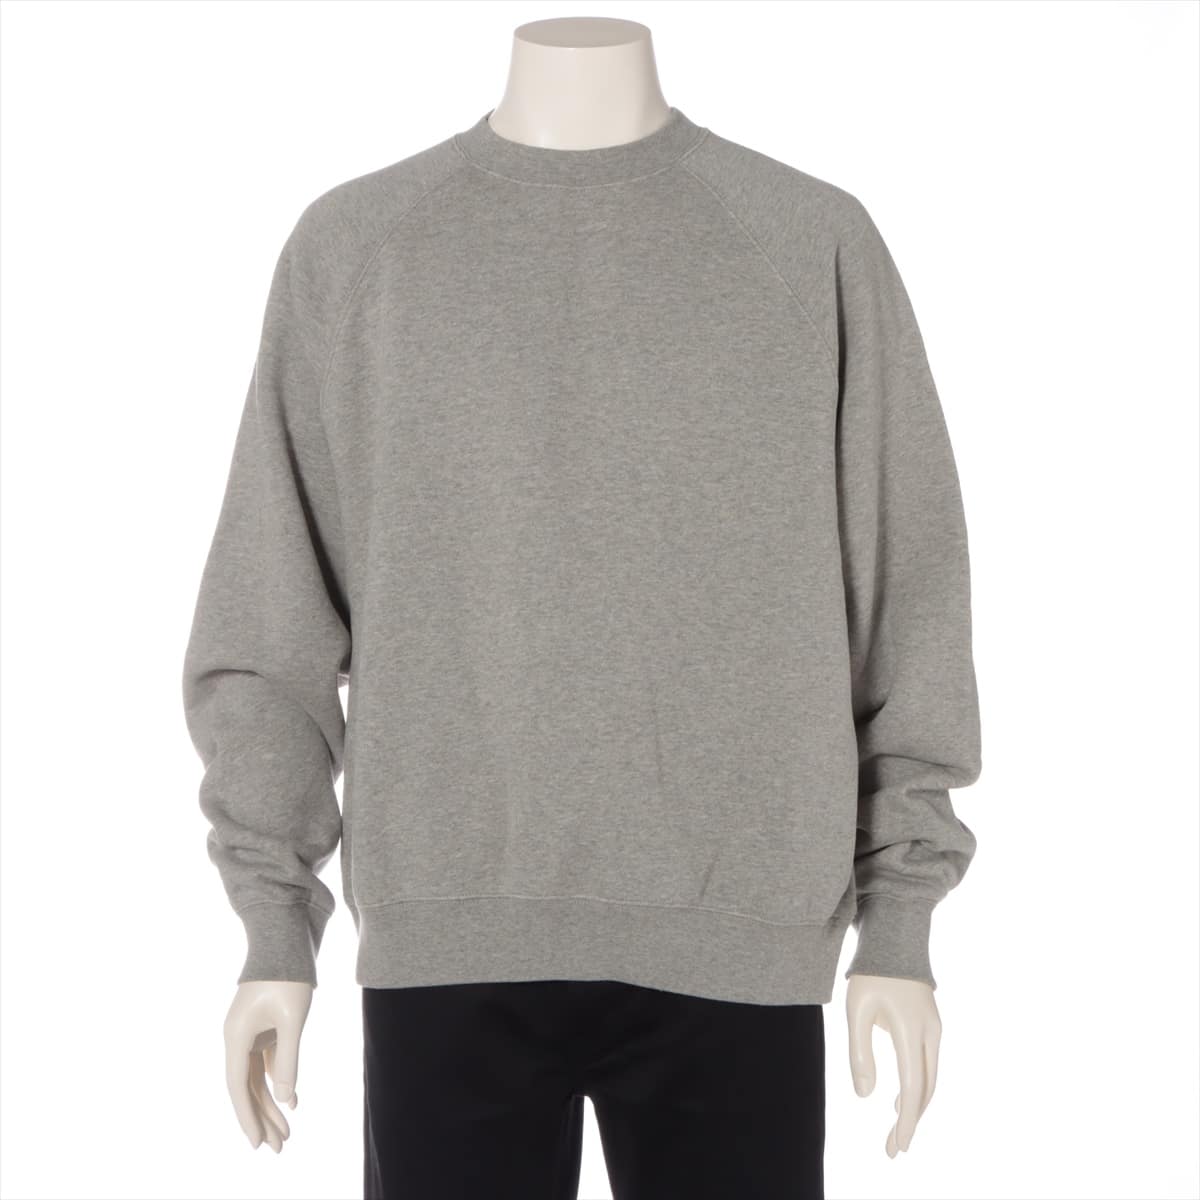 FEAR OF GOD Essentials Cotton & Polyester Basic knitted fabric S Men's Grey